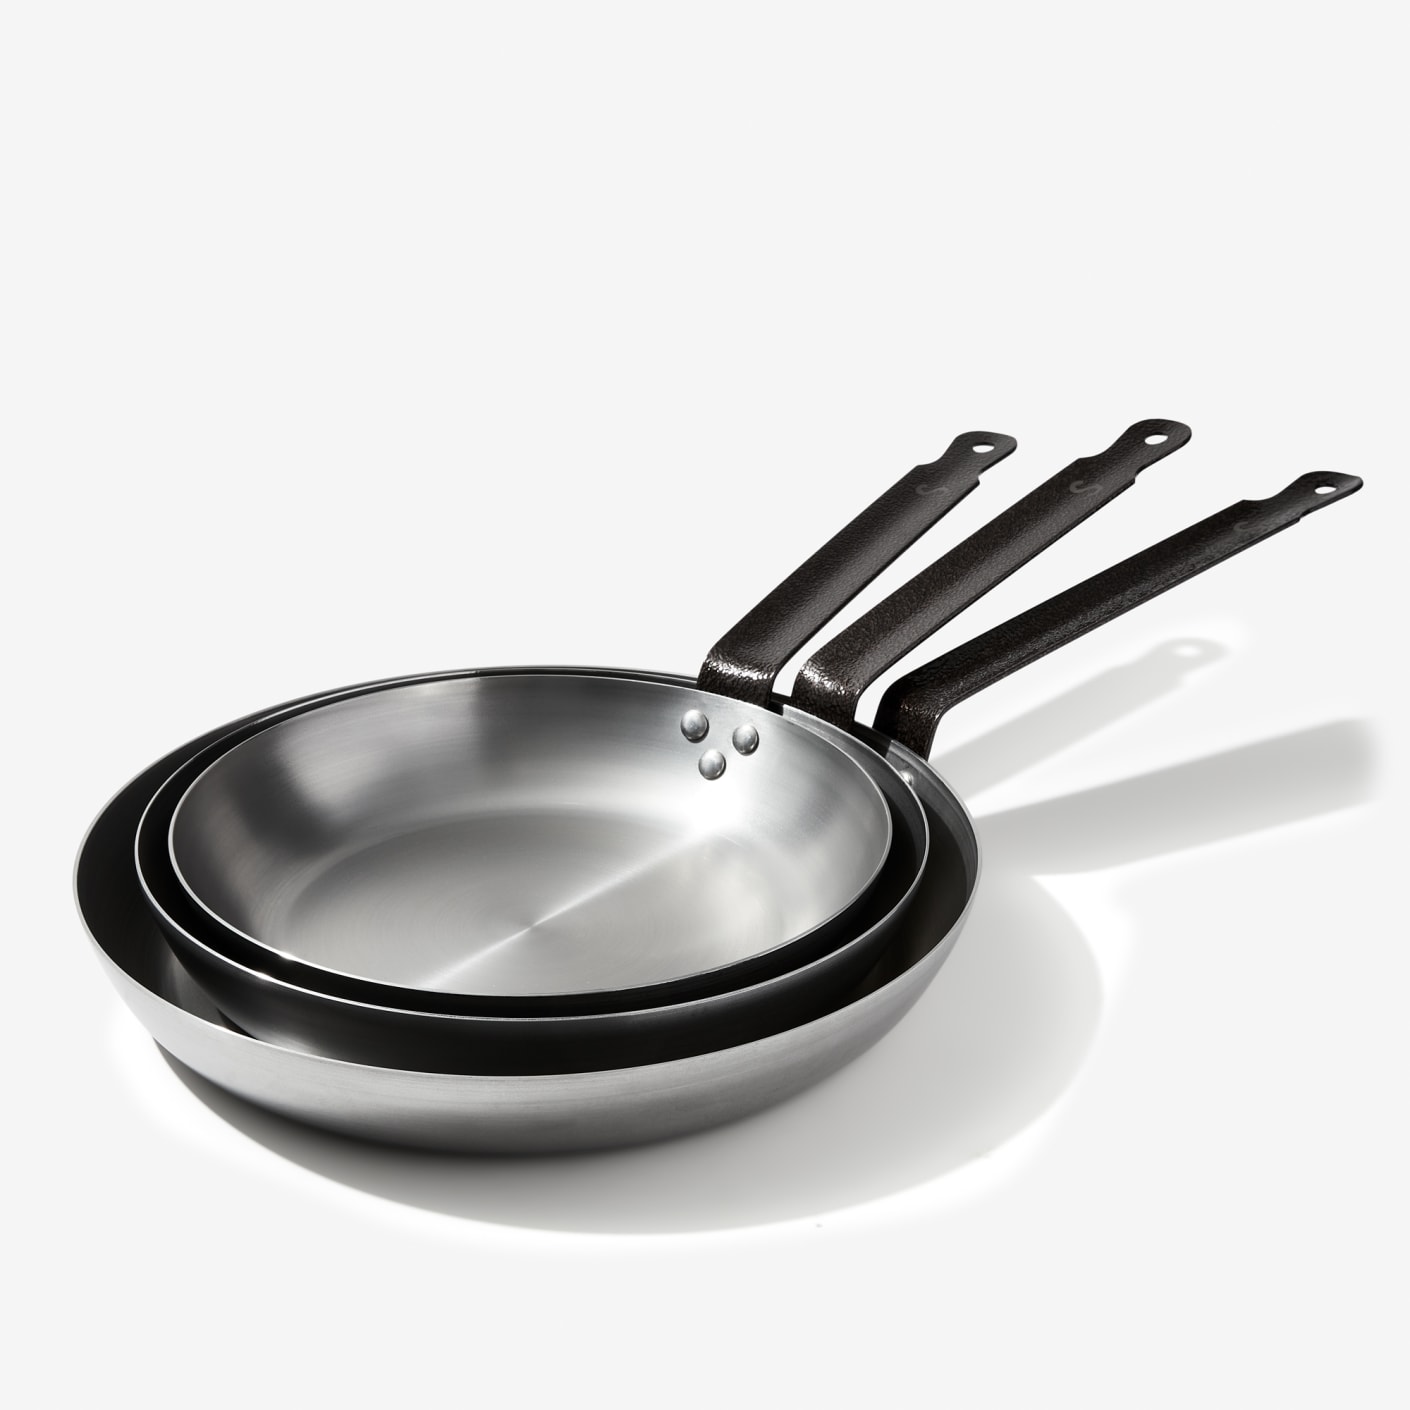 Sardel Nonstick Skillet: Our Review